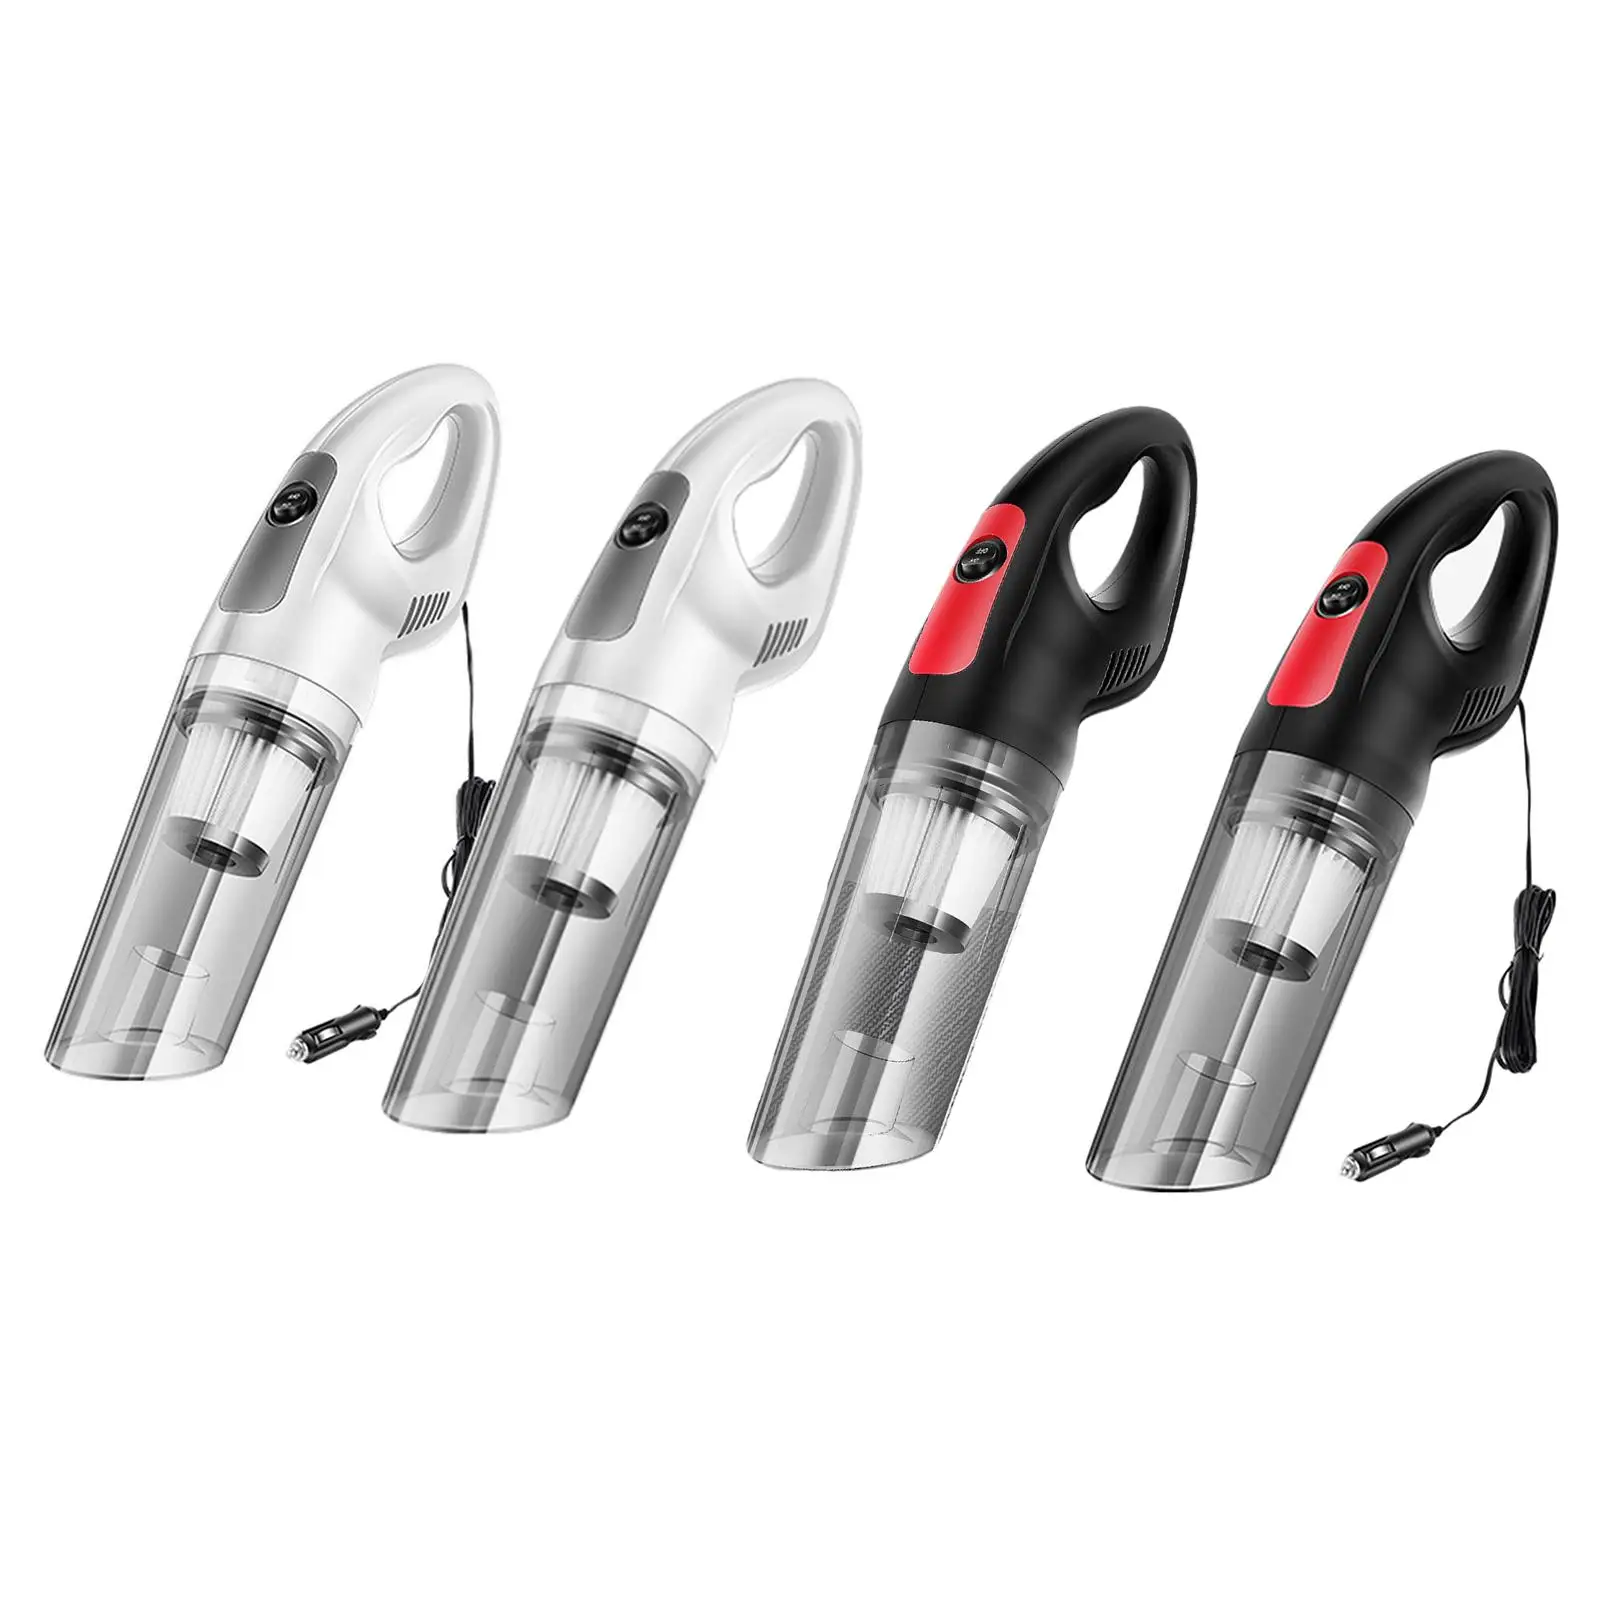 Portable Car Vacuum Cleaner 12000Kpa Washable Built in Battery Small Handheld Vacuum for Crevices Dust  Appliance